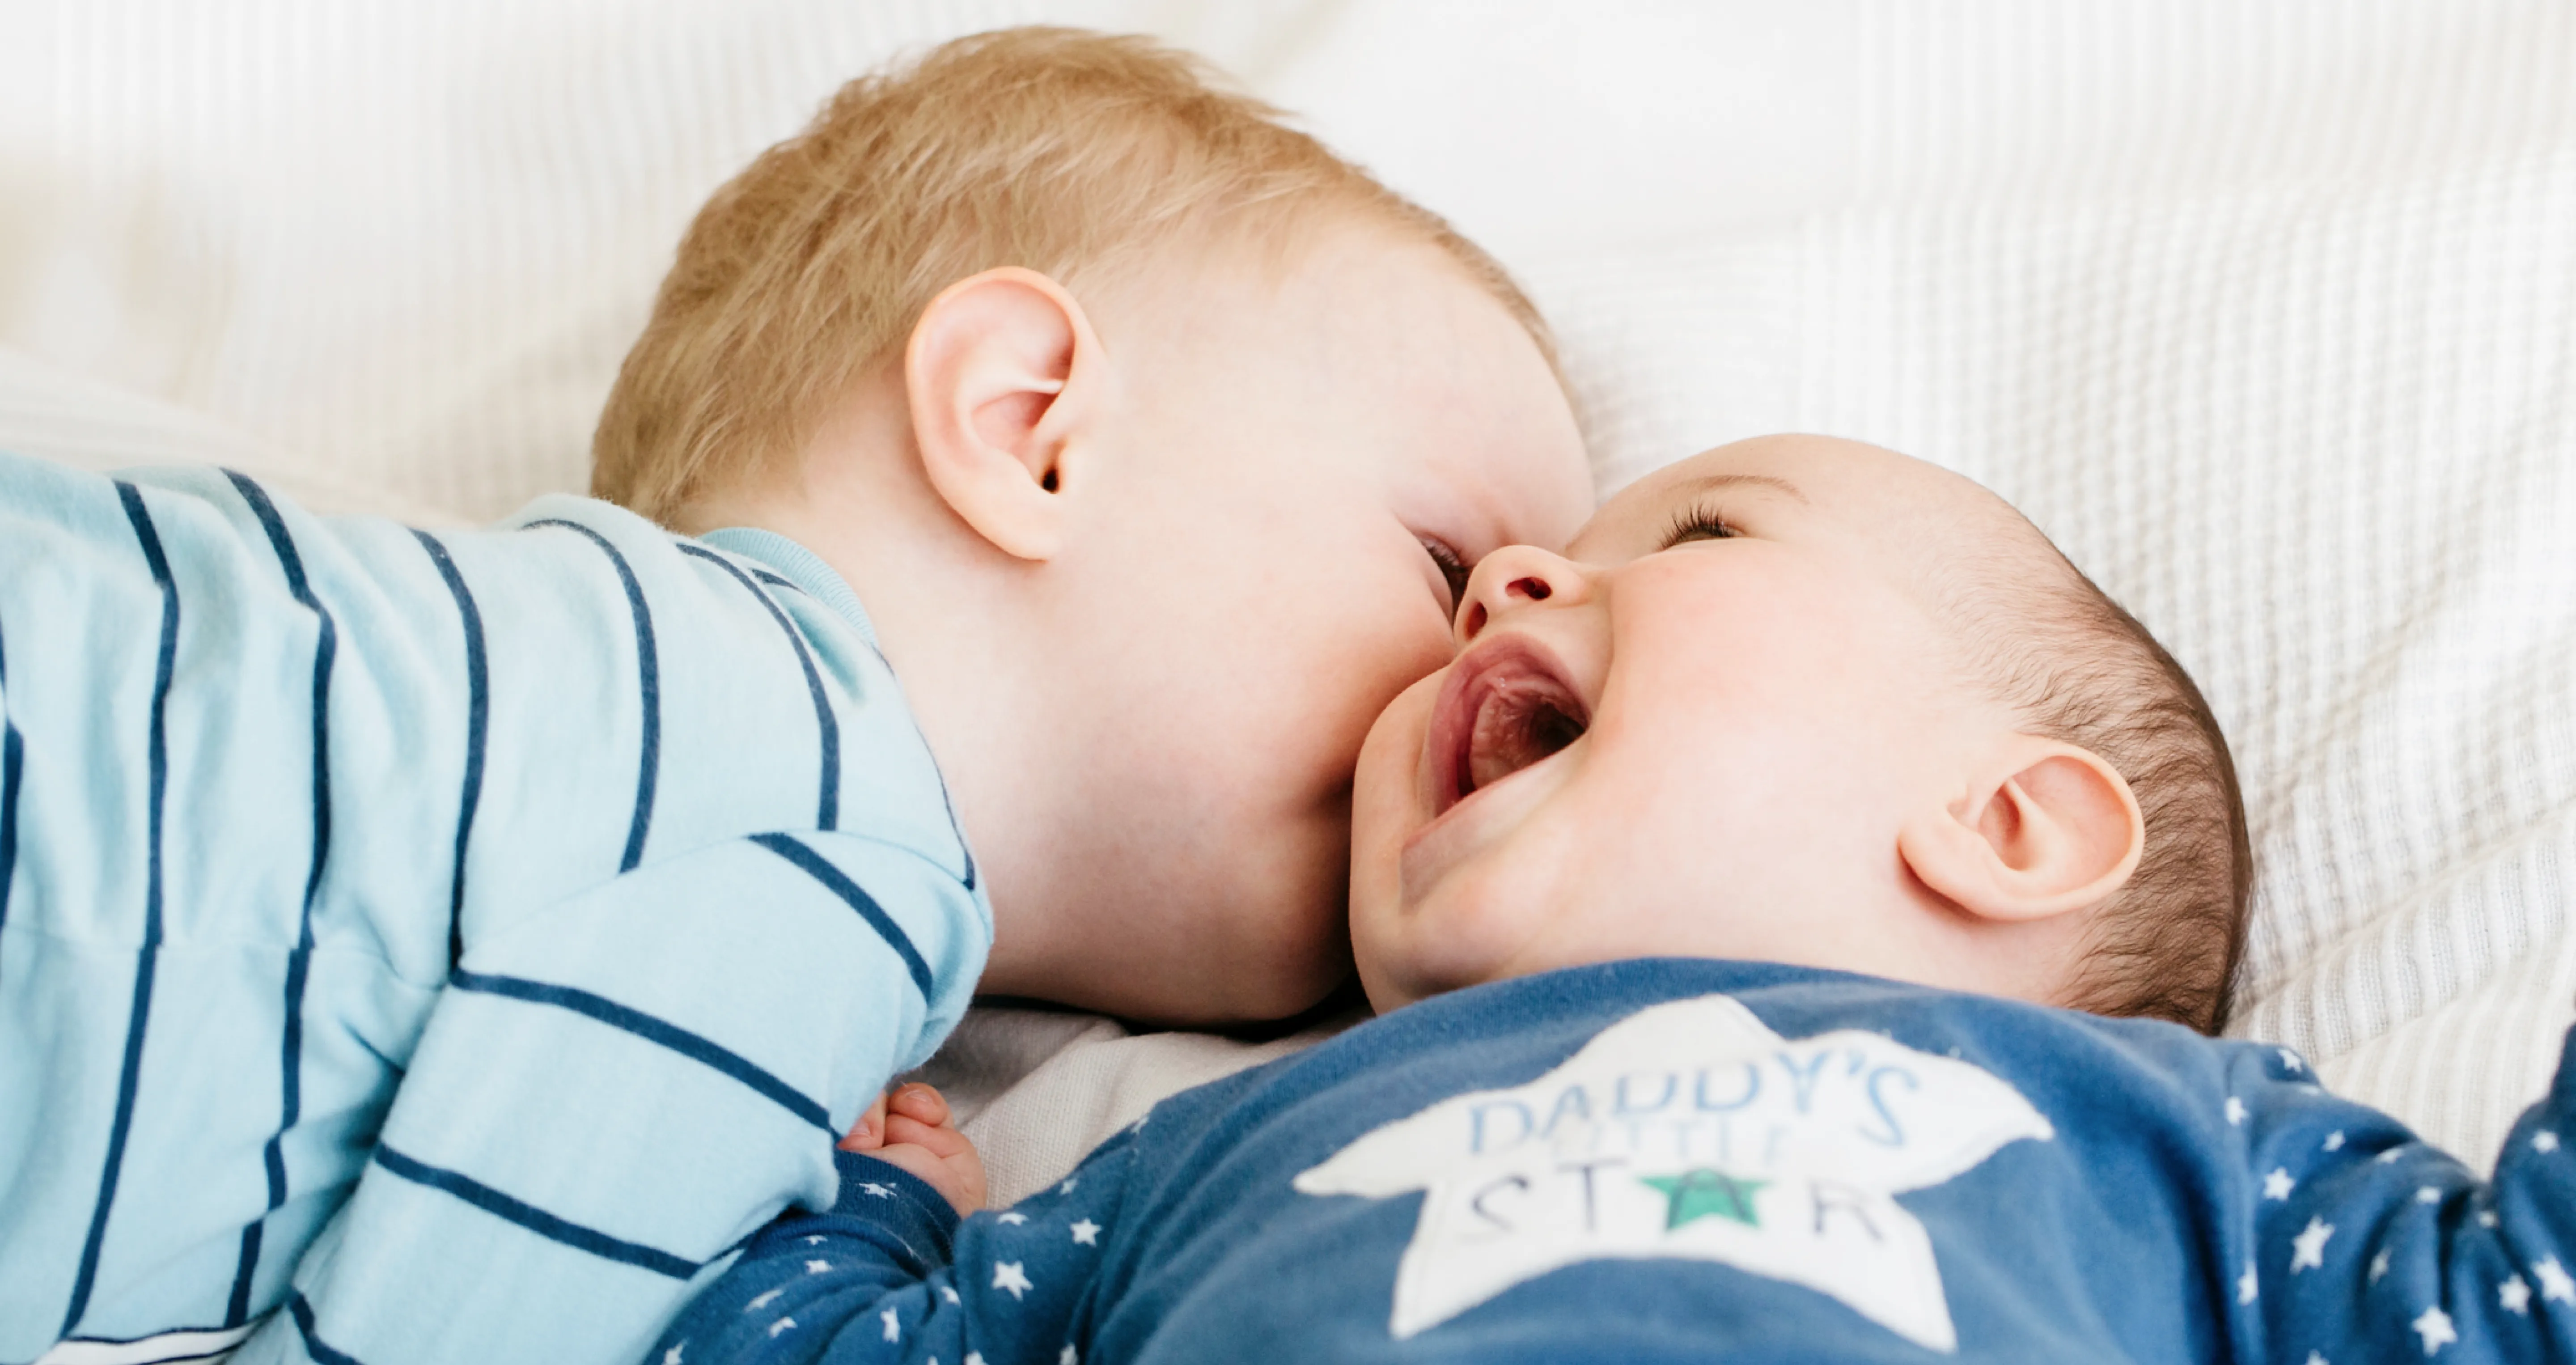 Two babies lying on a bed, laughing and playing, with one baby gently biting the other's cheek in a playful moment.